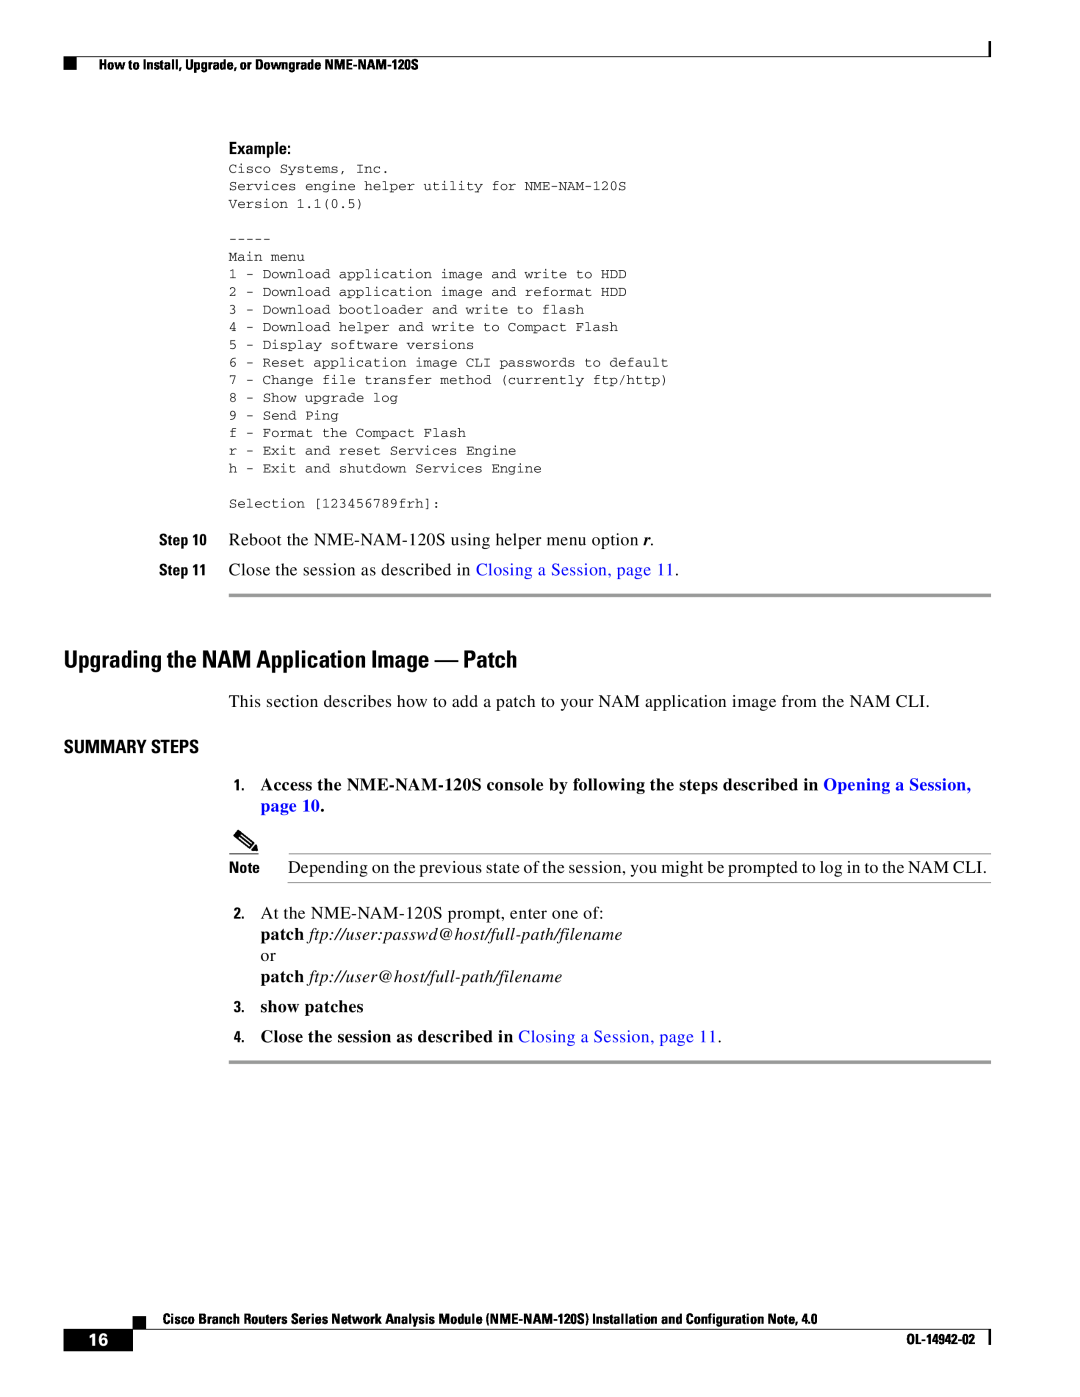 Cisco Systems SMNMADPTR manual Upgrading the NAM Application Image - Patch, show patches, Summary Steps, Example 